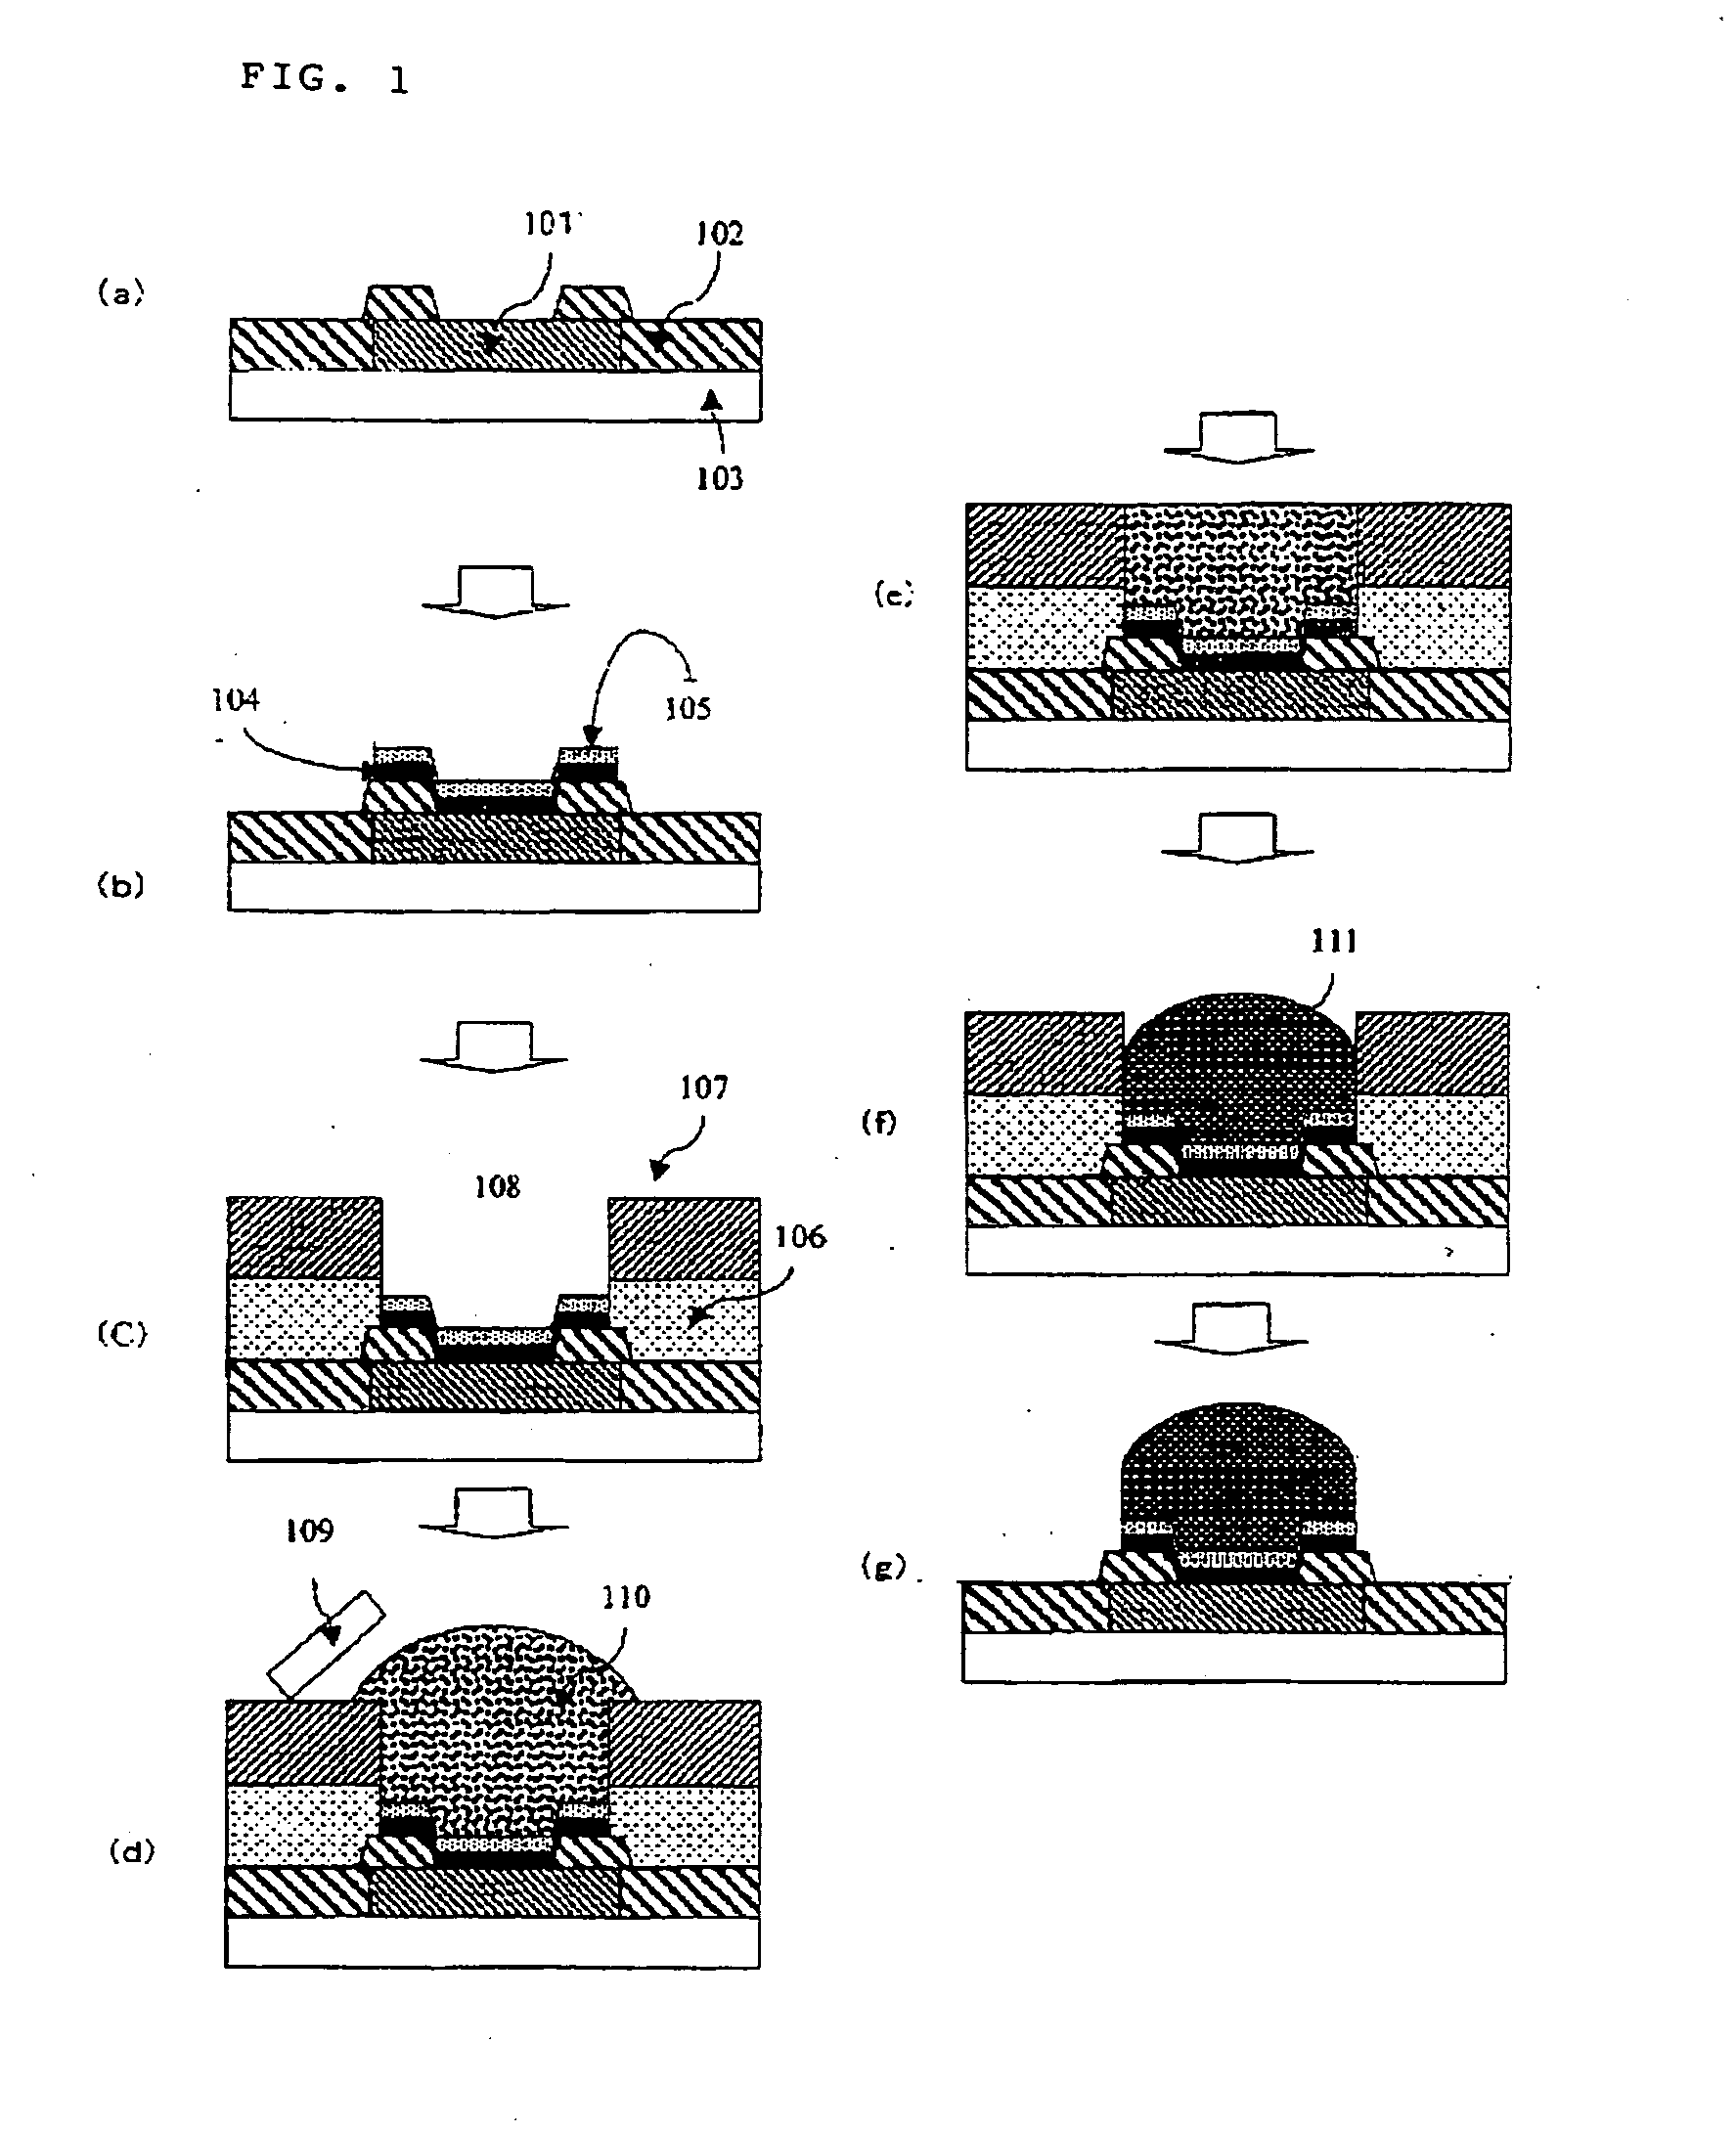 Bilayer Laminated Film for Bump Formation and Method of Bump Formation